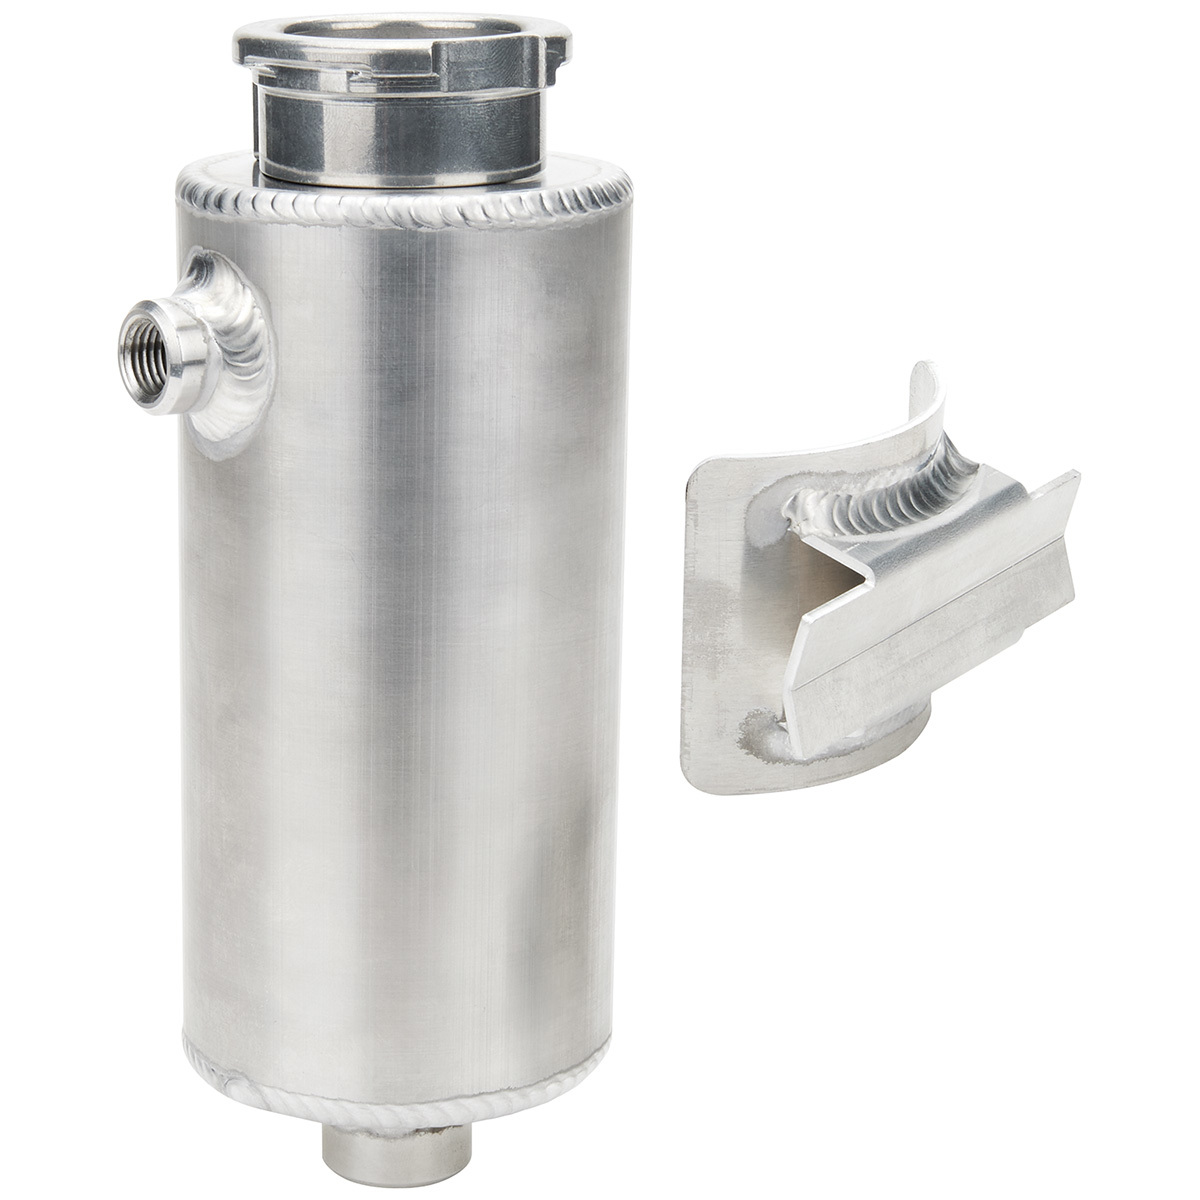 Allstar Performance 36116 Recovery Tank, 1 qt, 1/2 in NPT Inlet, 1/4 in NPT Outlet, Filler Neck, Aluminum, Natural, Each